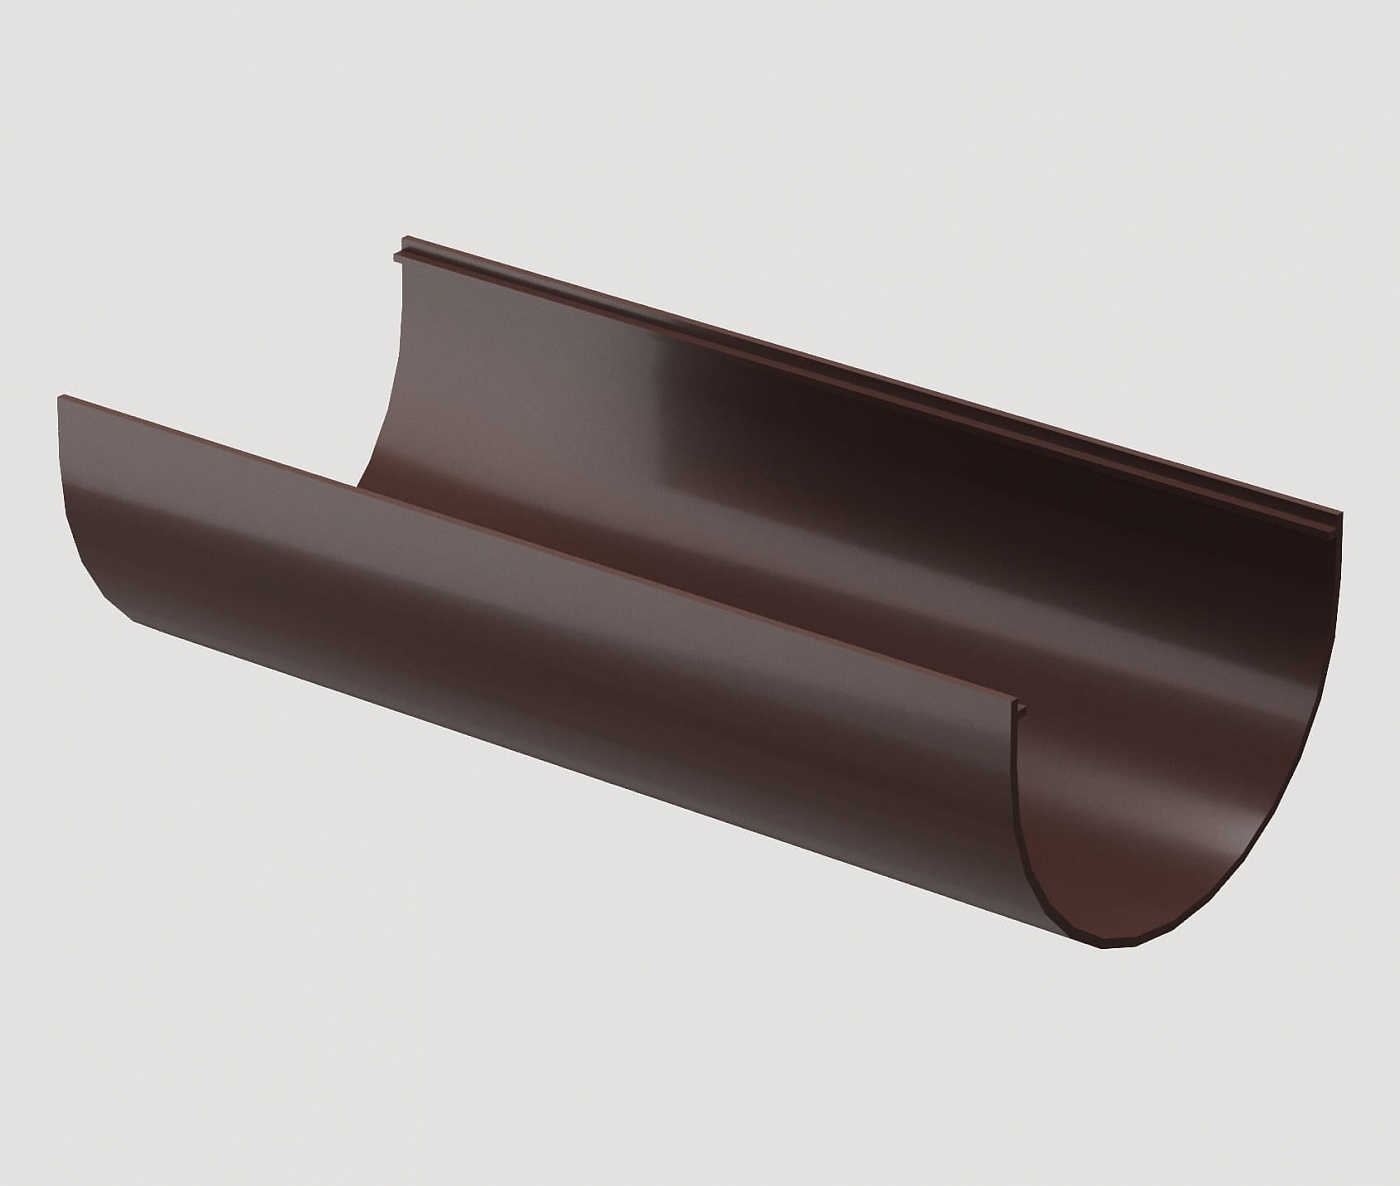 Водостоки - STANDARD SERIES Dark brown RAL 8017 - Elements of the drainage system - Gutter 2m